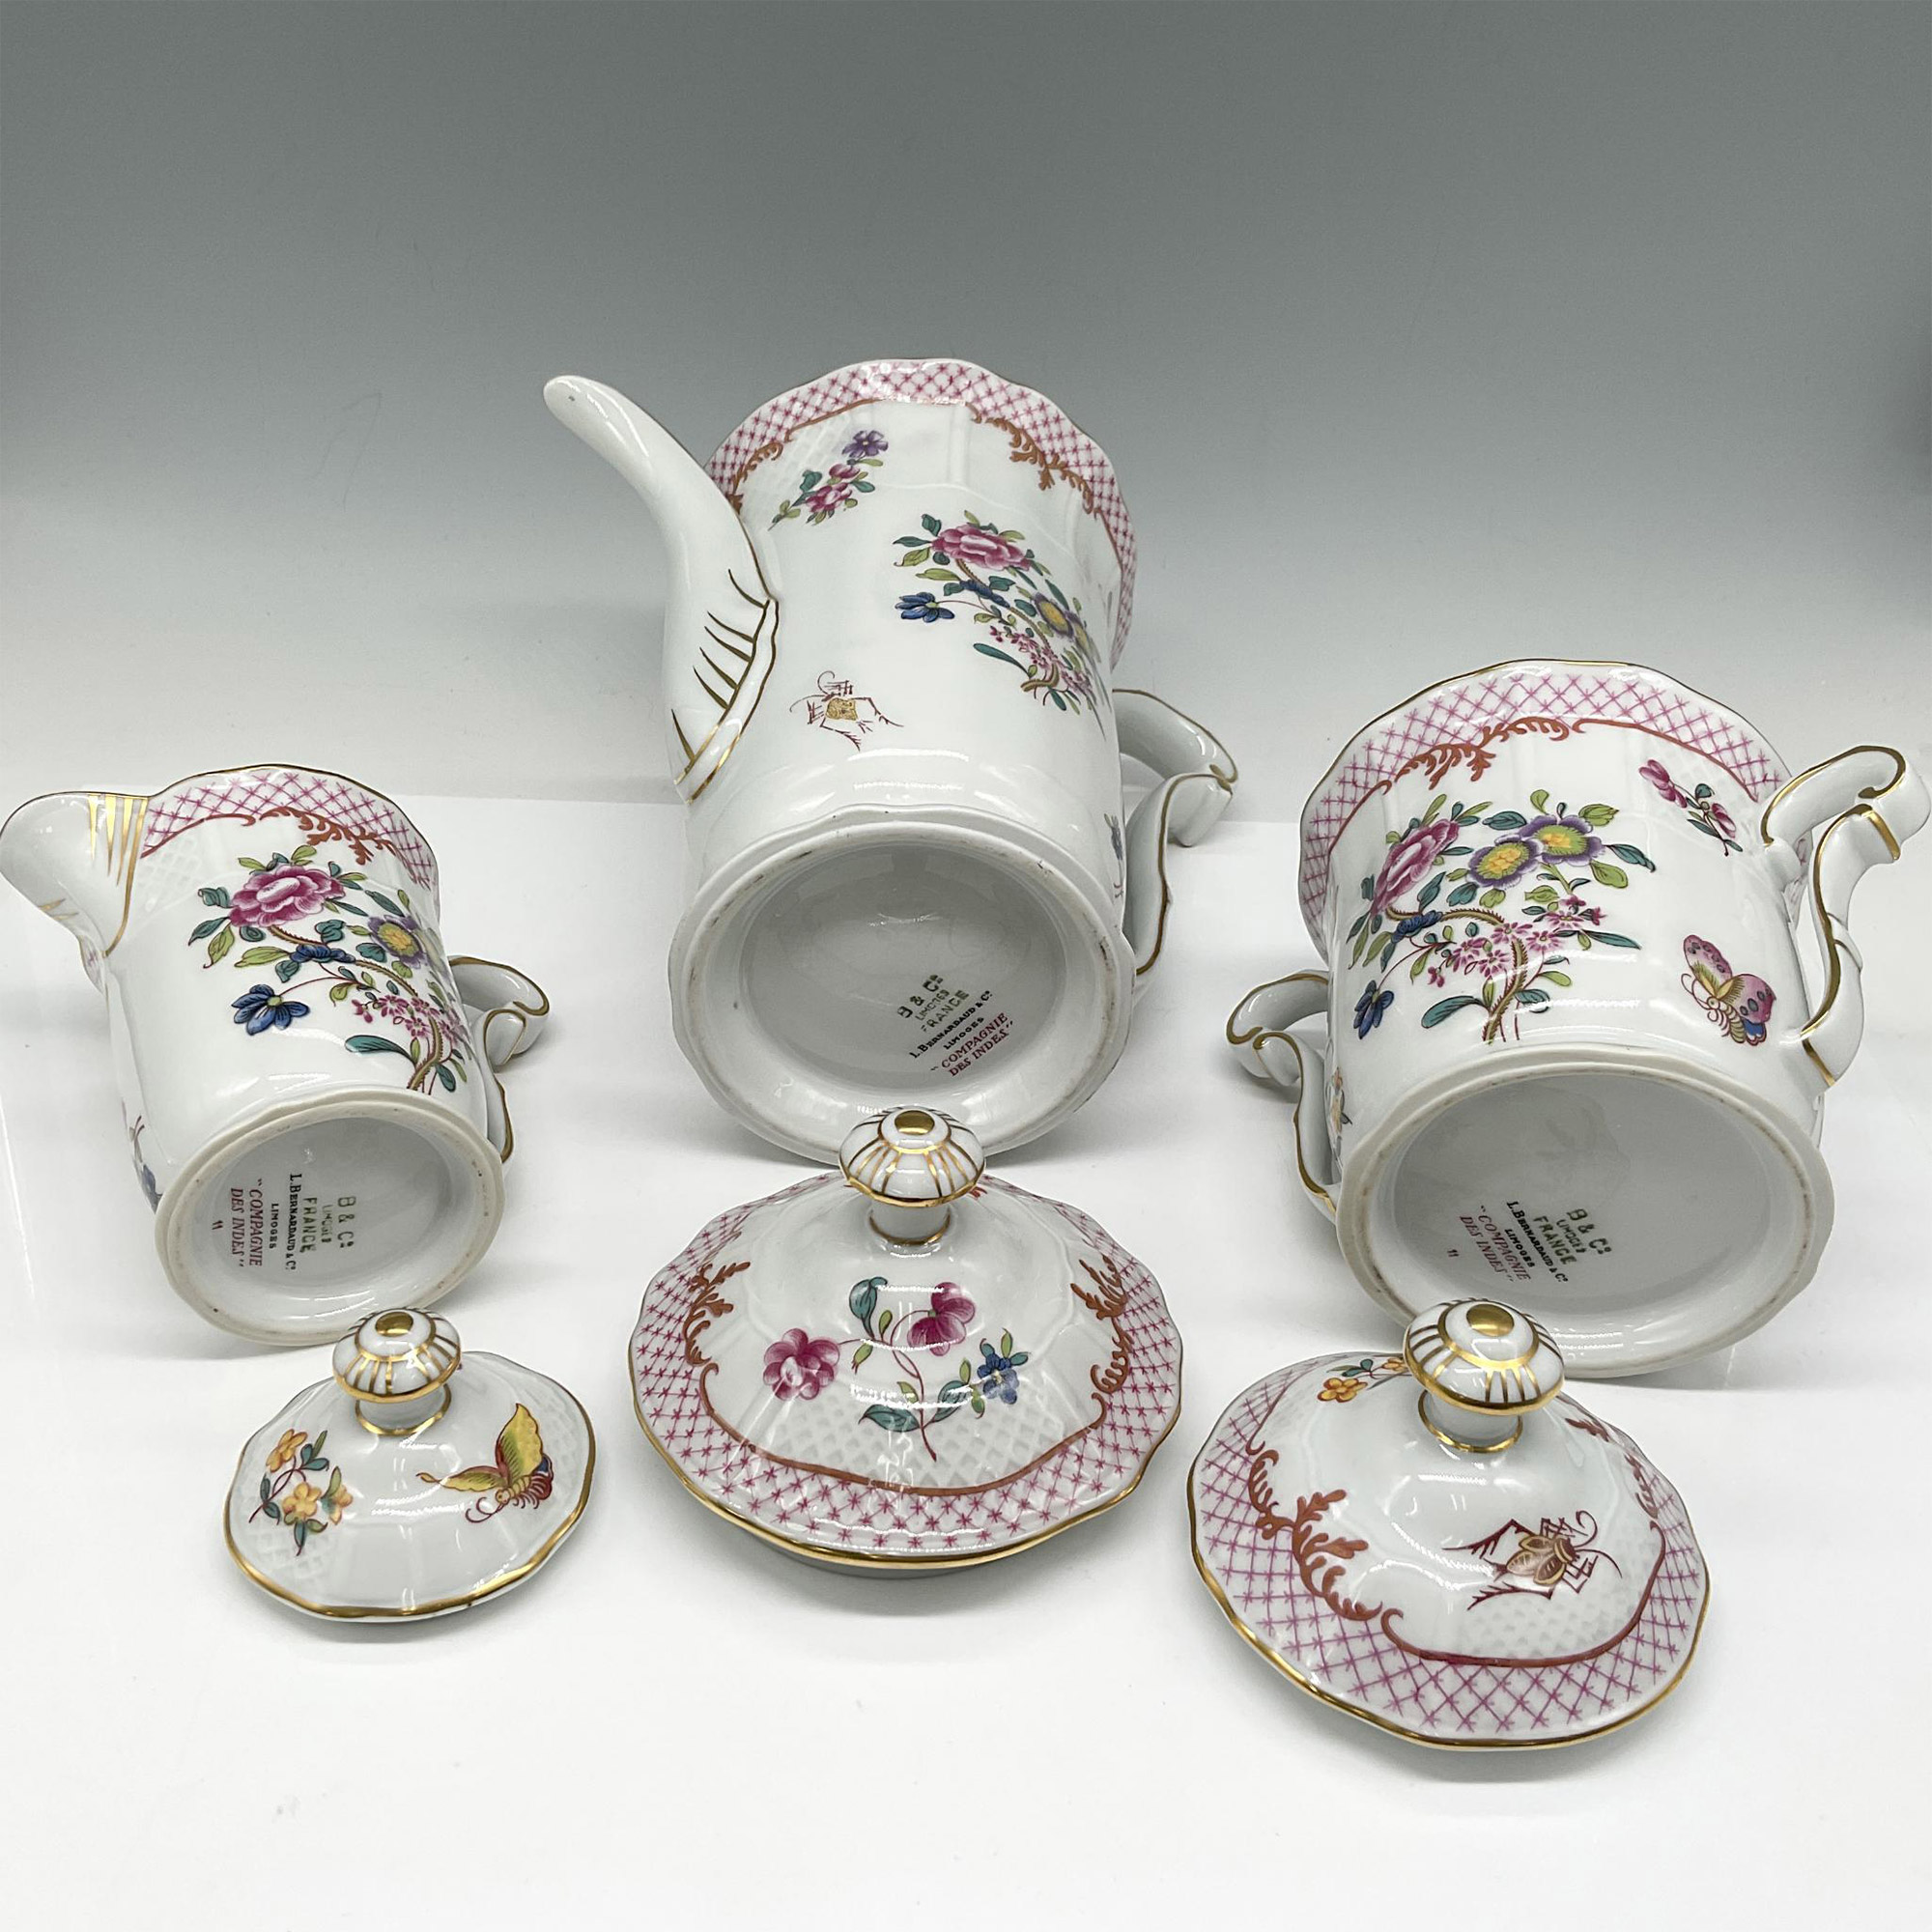 3pc B & C Limoges Porcelain Coffee Service, Compagnie - Image 4 of 5